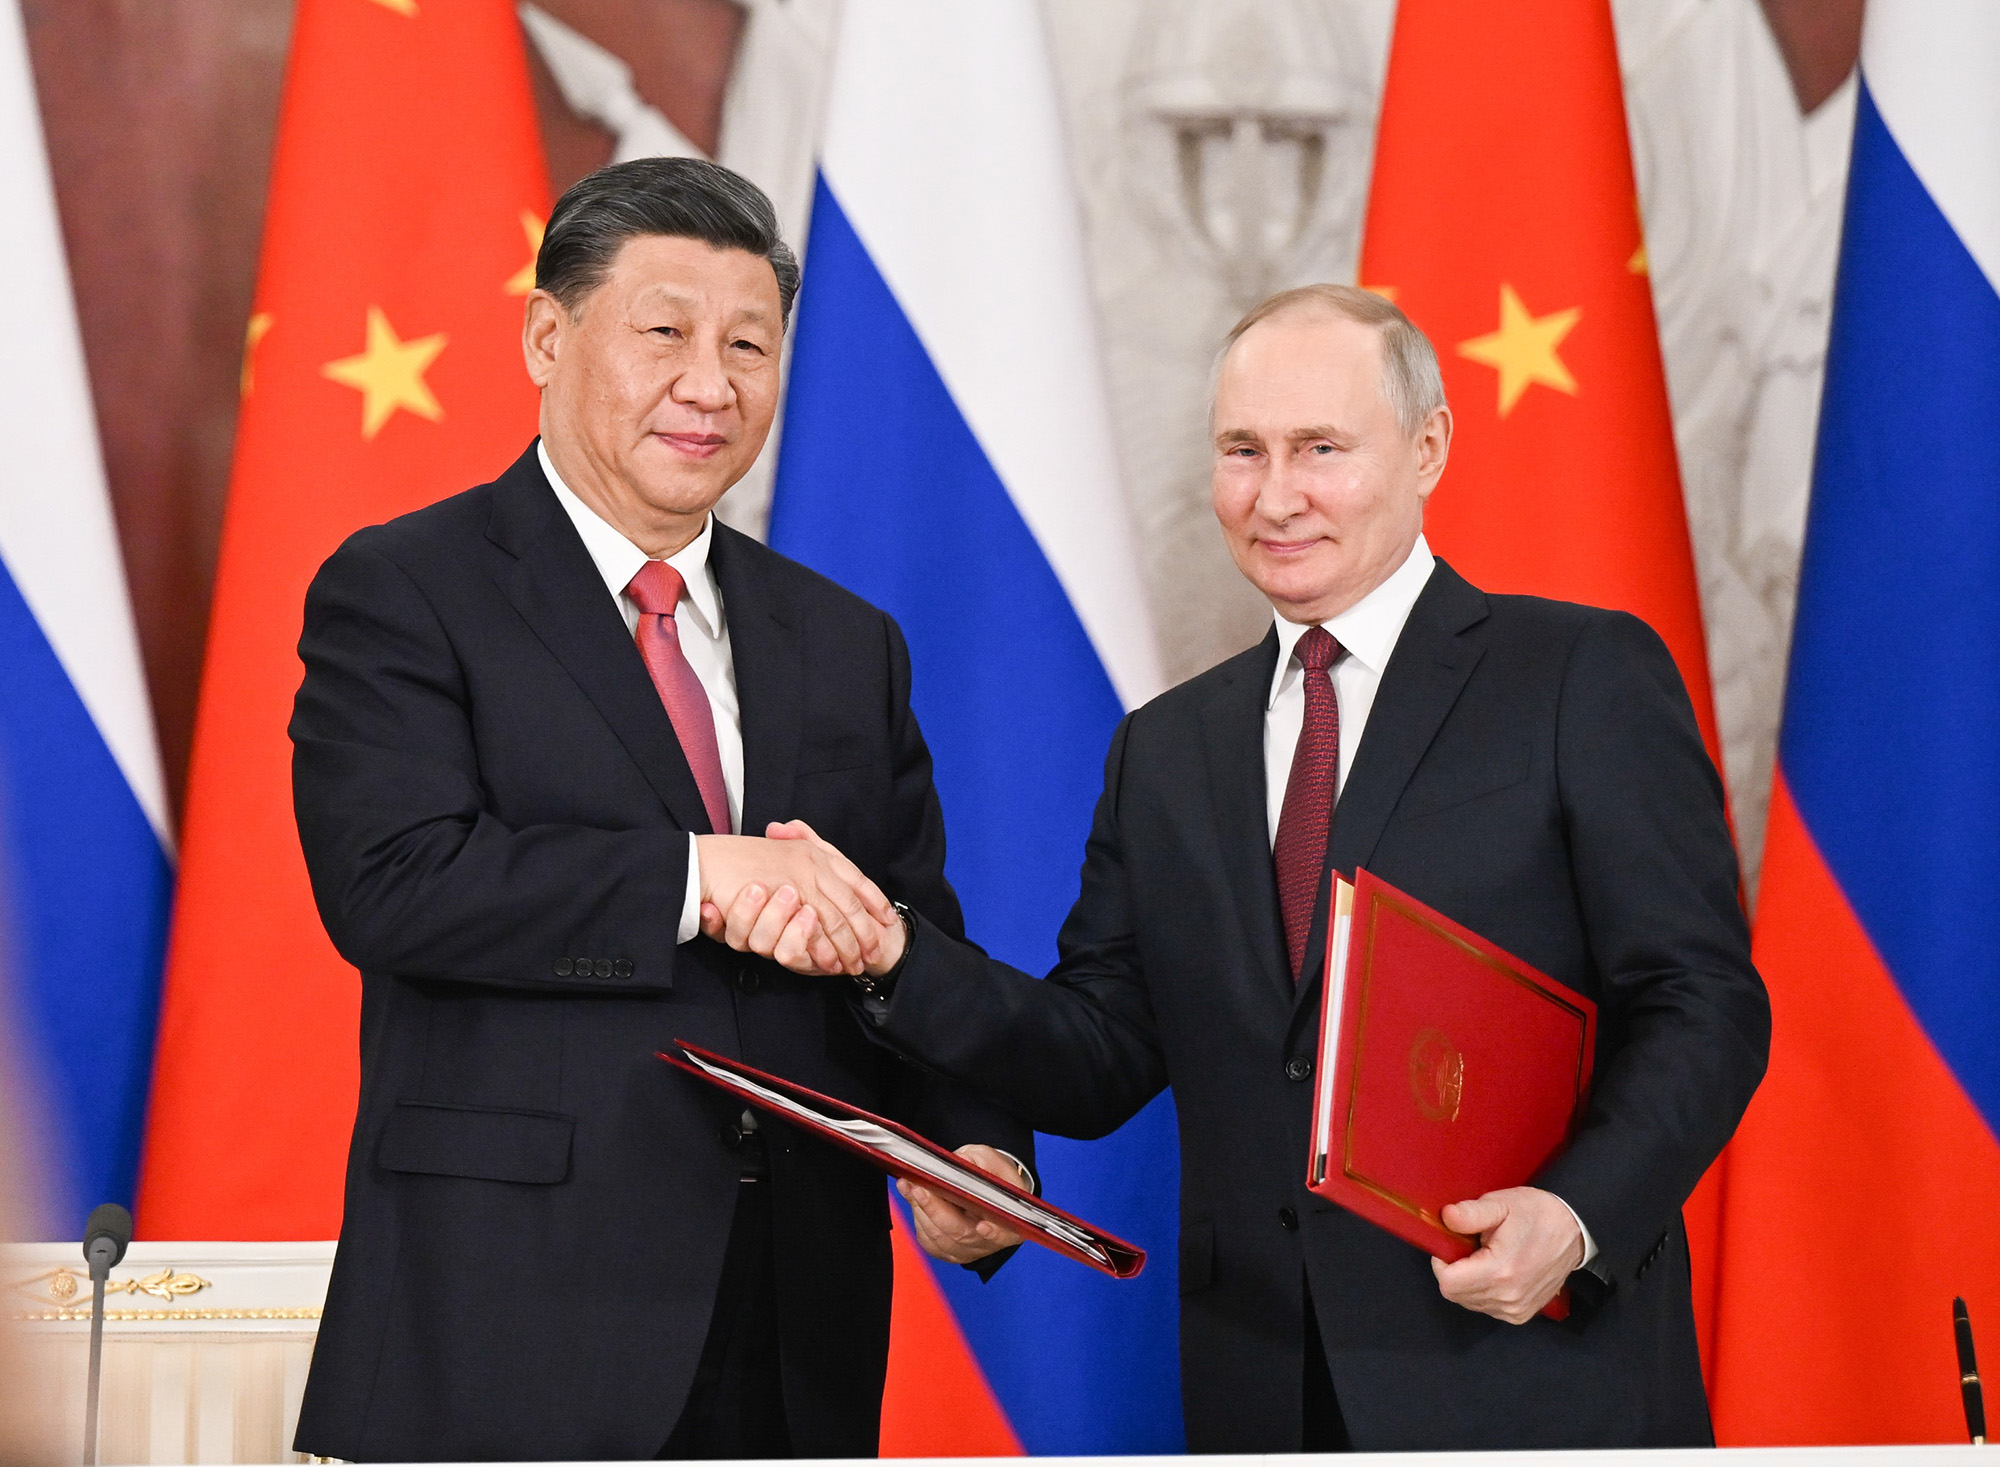 Chinese President Xi Jinping, and Russian President Vladimir Putin shake hands after jointly signing a Joint Statement of the People's Republic of China and the Russian Federation on Deepening the Comprehensive Strategic Partnership of Coordination for the New Era and a Joint Statement of the President of the People's Republic of China and the President of the Russian Federation on Pre-2030 Development Plan on Priorities in China-Russia Economic Cooperation in Moscow, Russia, March 21, 2023. Xi on Tuesday held talks with Putin at the Kremlin in Moscow. (Photo by 